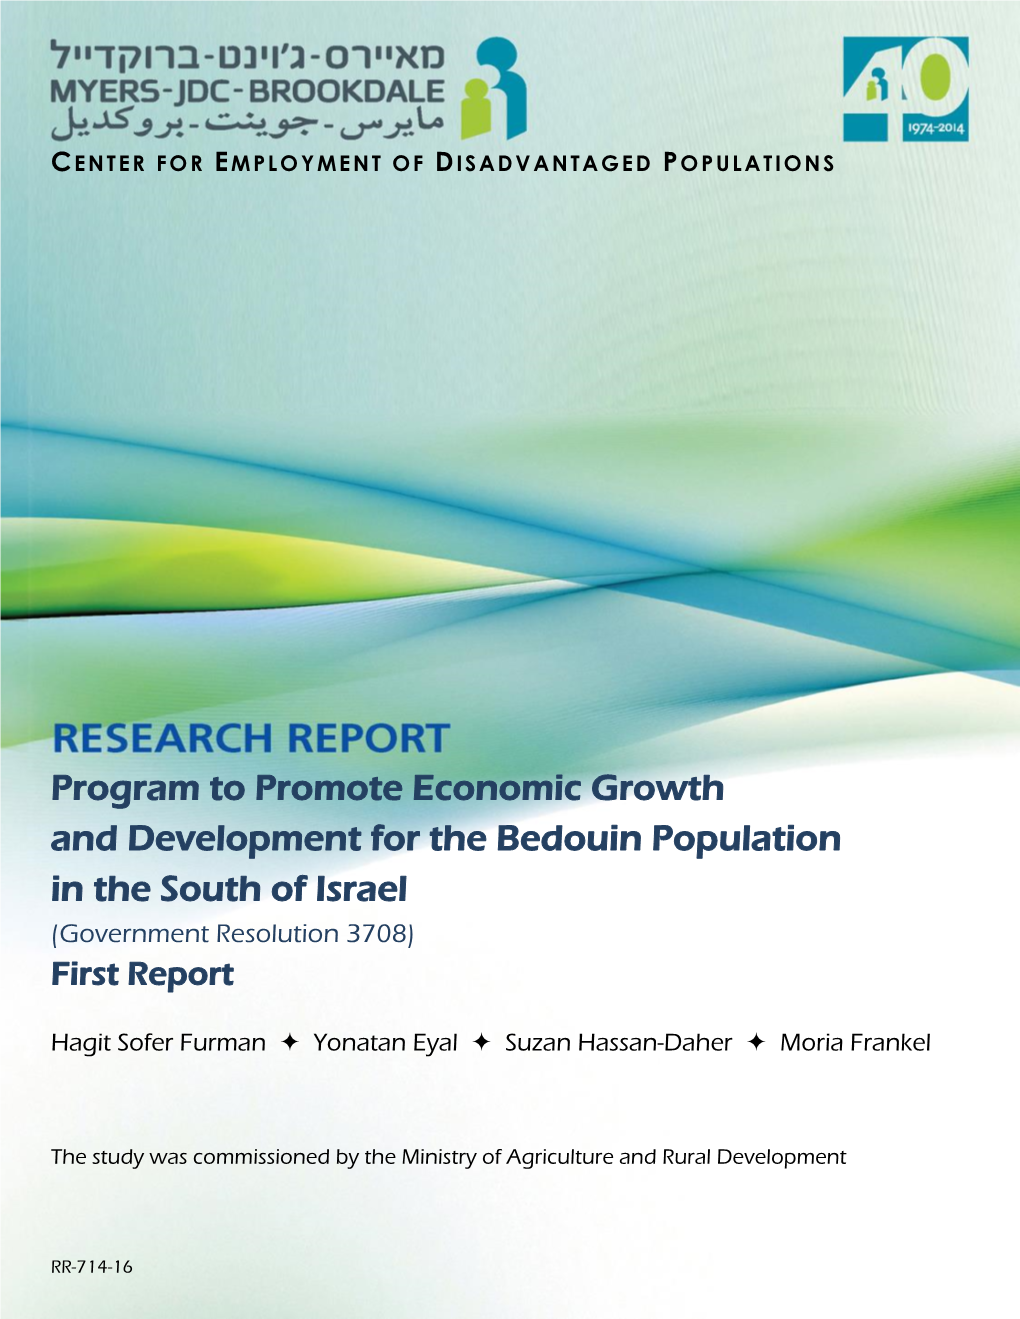 Program to Promote Economic Growth and Development for the Bedouin Population in the South of Israel (Government Resolution 3708) First Report